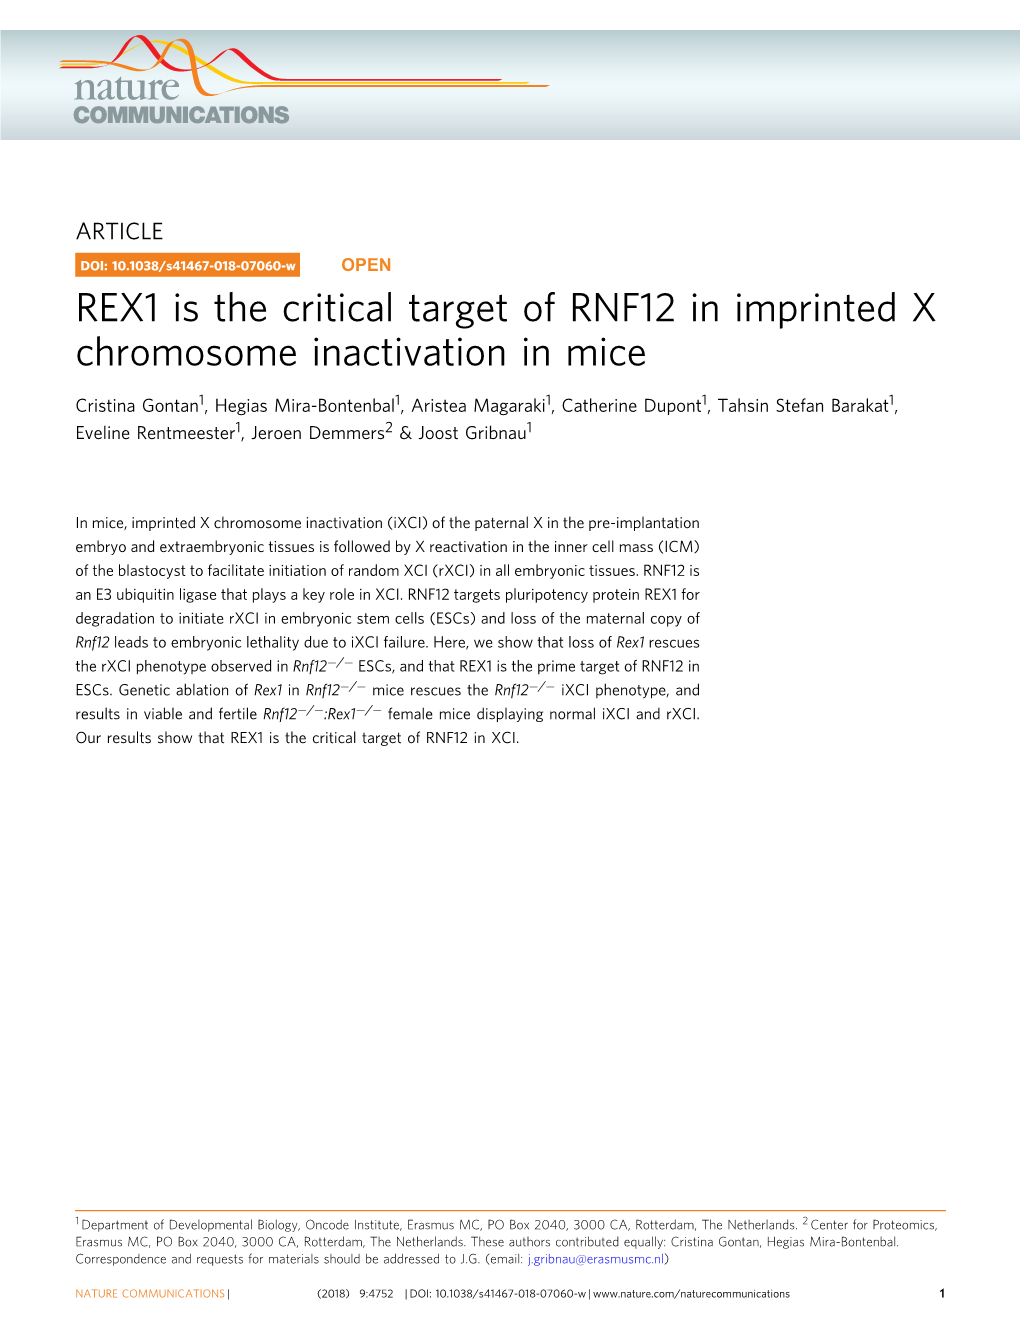 REX1 Is the Critical Target of RNF12 in Imprinted X Chromosome Inactivation in Mice